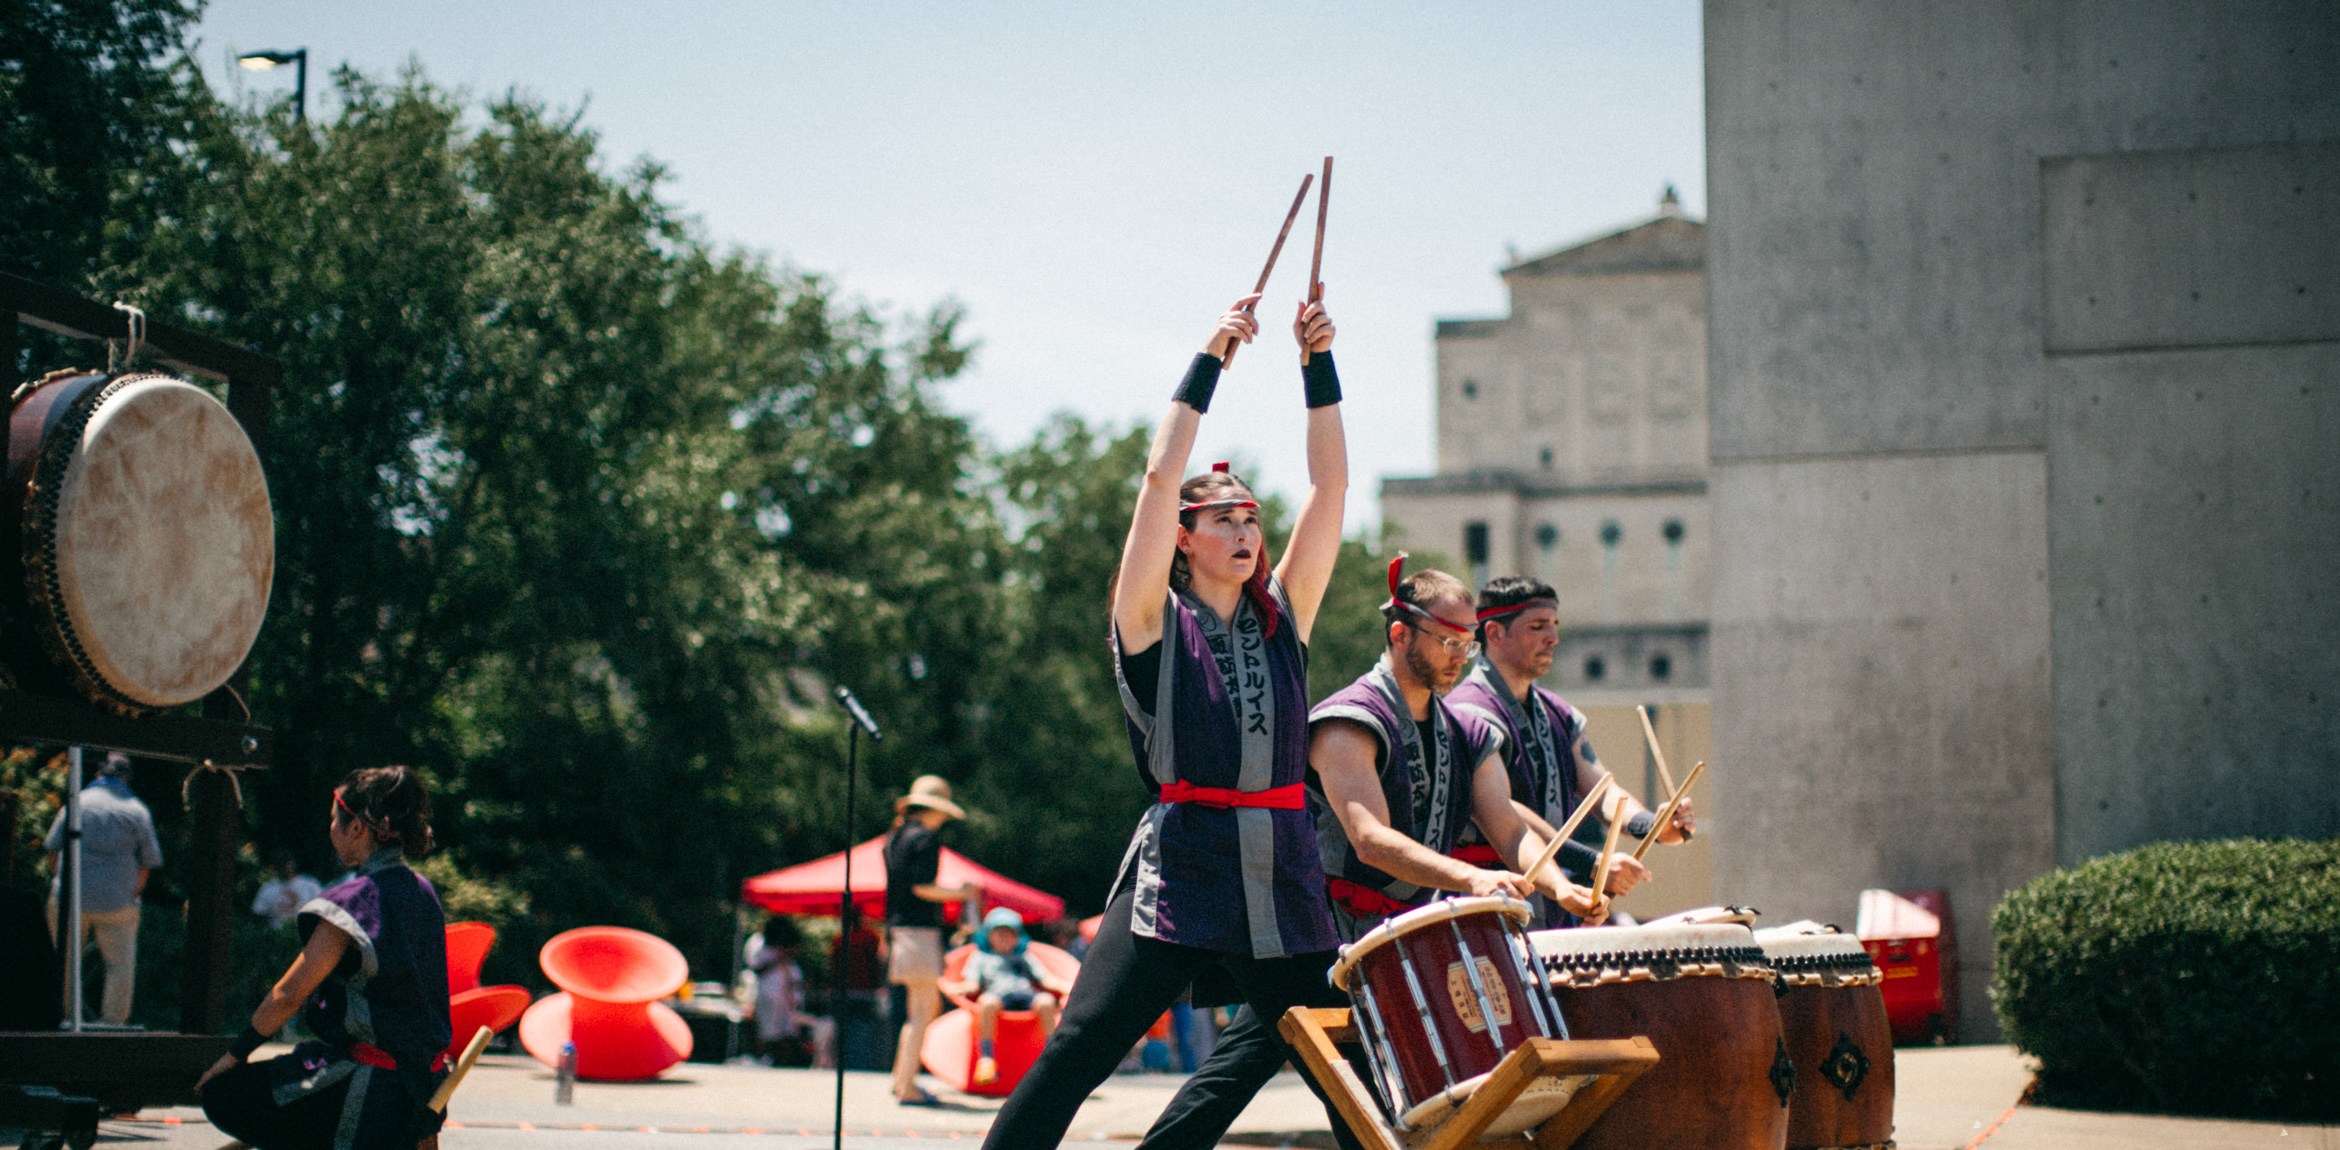 A drumming troupe performs in the Pulitzer's parking lot during the event.